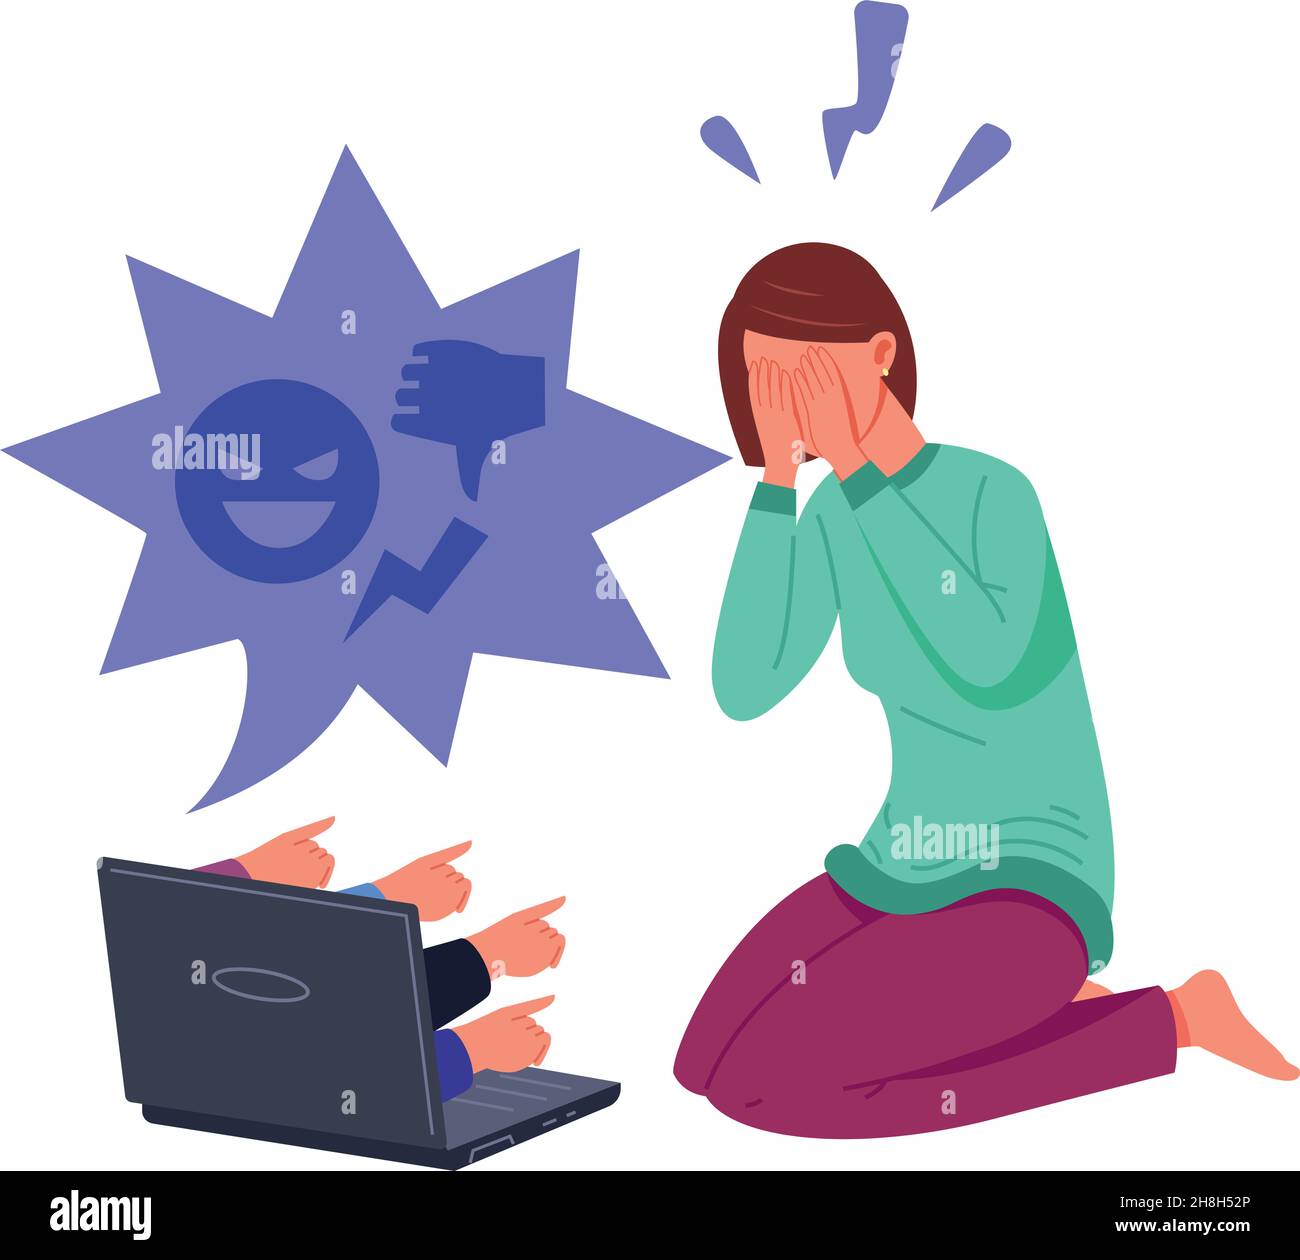 Online bullying. Depressed girl crying near laptop, cyber abuse, vector illustration isolated on white background Stock Vector